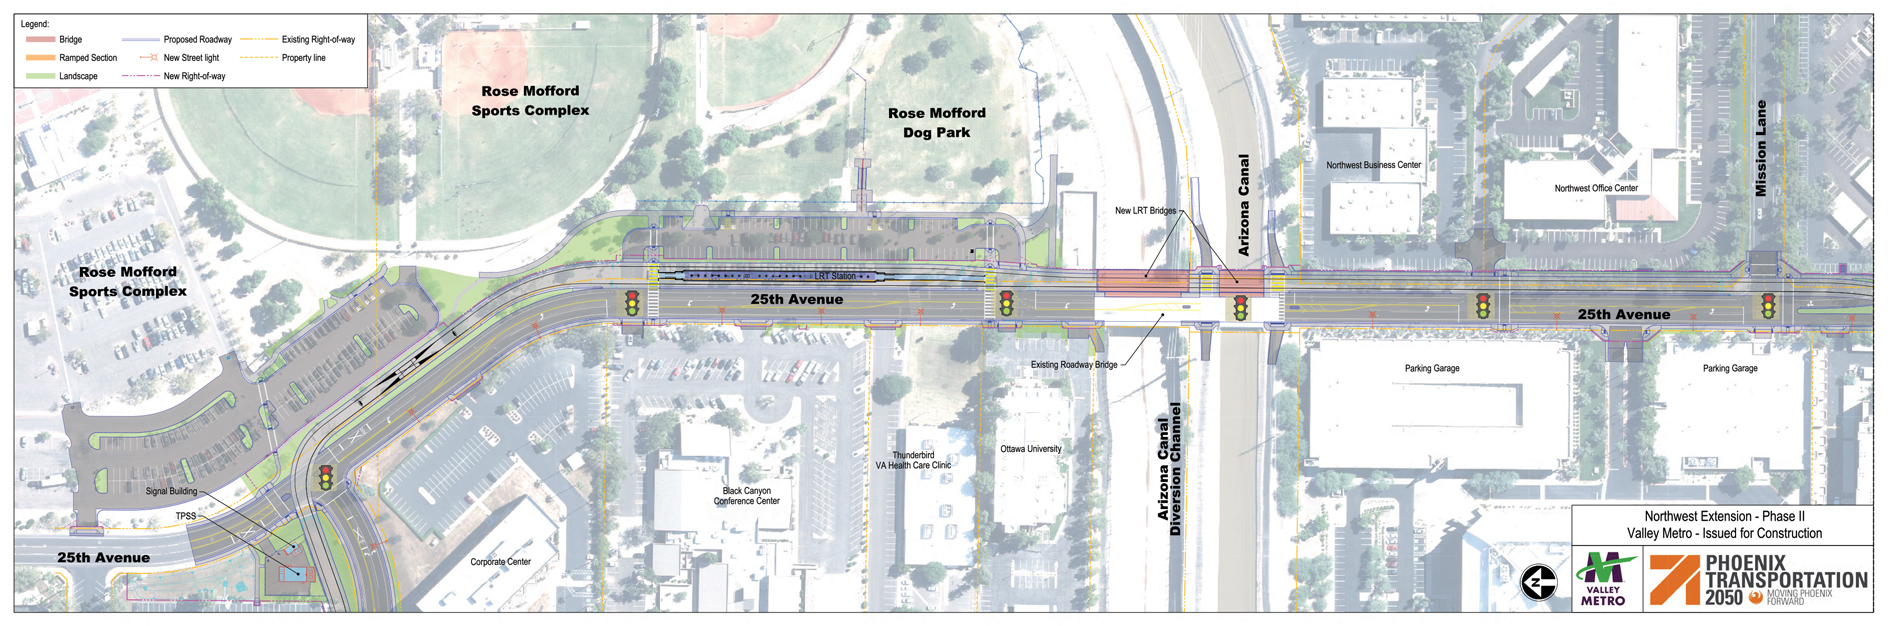 Final design for the 25th Ave. corridor is shown from where the tracks turn north at Dunlap Ave. and extending to Mountain View Rd., where the tracks turn and head west. Along 25th Ave., the tracks are aligned east of the roadway. A light rail station is shown adjacent to the Rose Mofford Dog Park.
                         